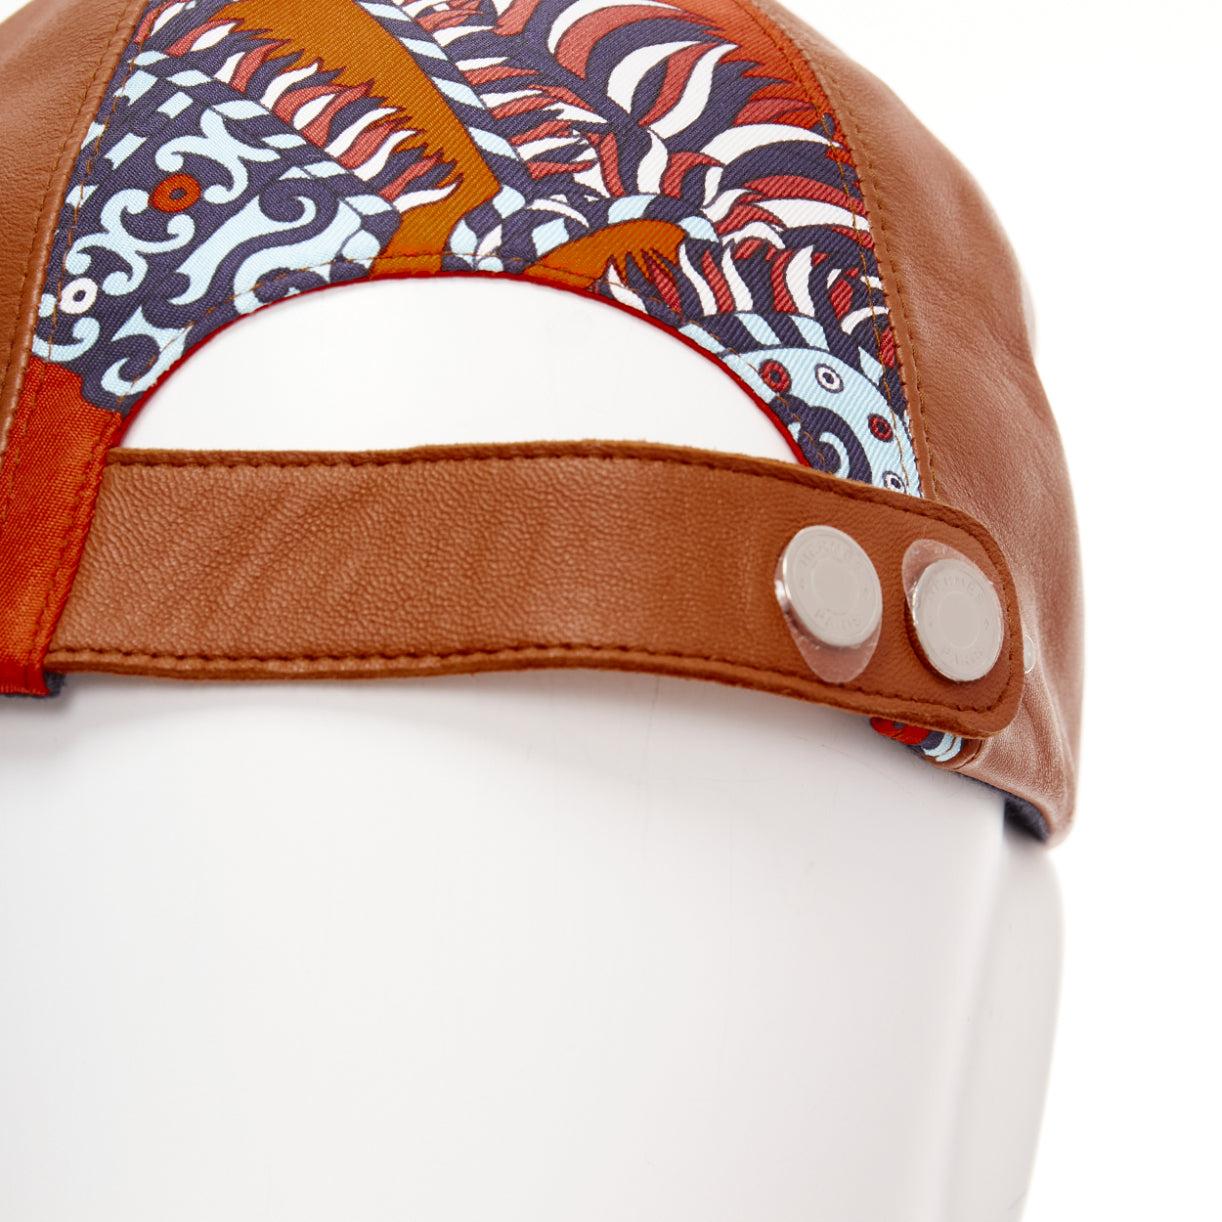 HERMES brown lambskin leather navy orange cotton silk scarf patch cap 58cm
Reference: AAWC/A00929
Brand: Hermes
Material: Leather, Cotton, Blend
Color: Brown, Navy
Pattern: Geometric
Closure: Snap Buttons
Lining: Orange Fabric
Extra Details: Snap